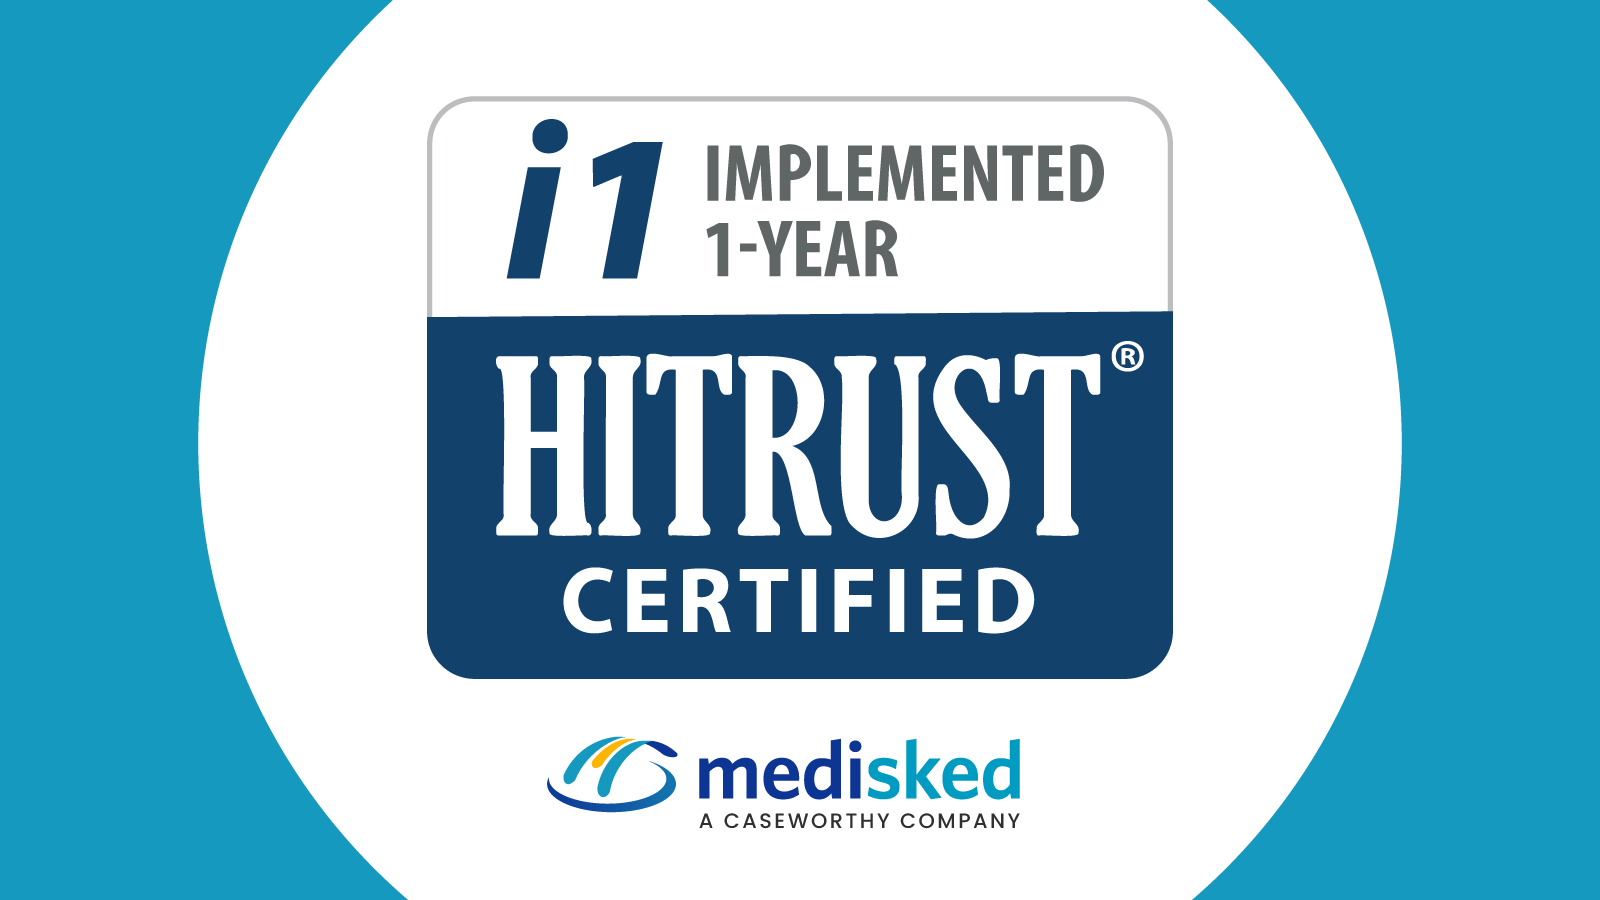 MediSked, a CaseWorthy Company, Achieves HITRUST Implemented, 1-year (i1) Certification to Manage Data Protection and Mitigate Cybersecurity Threats